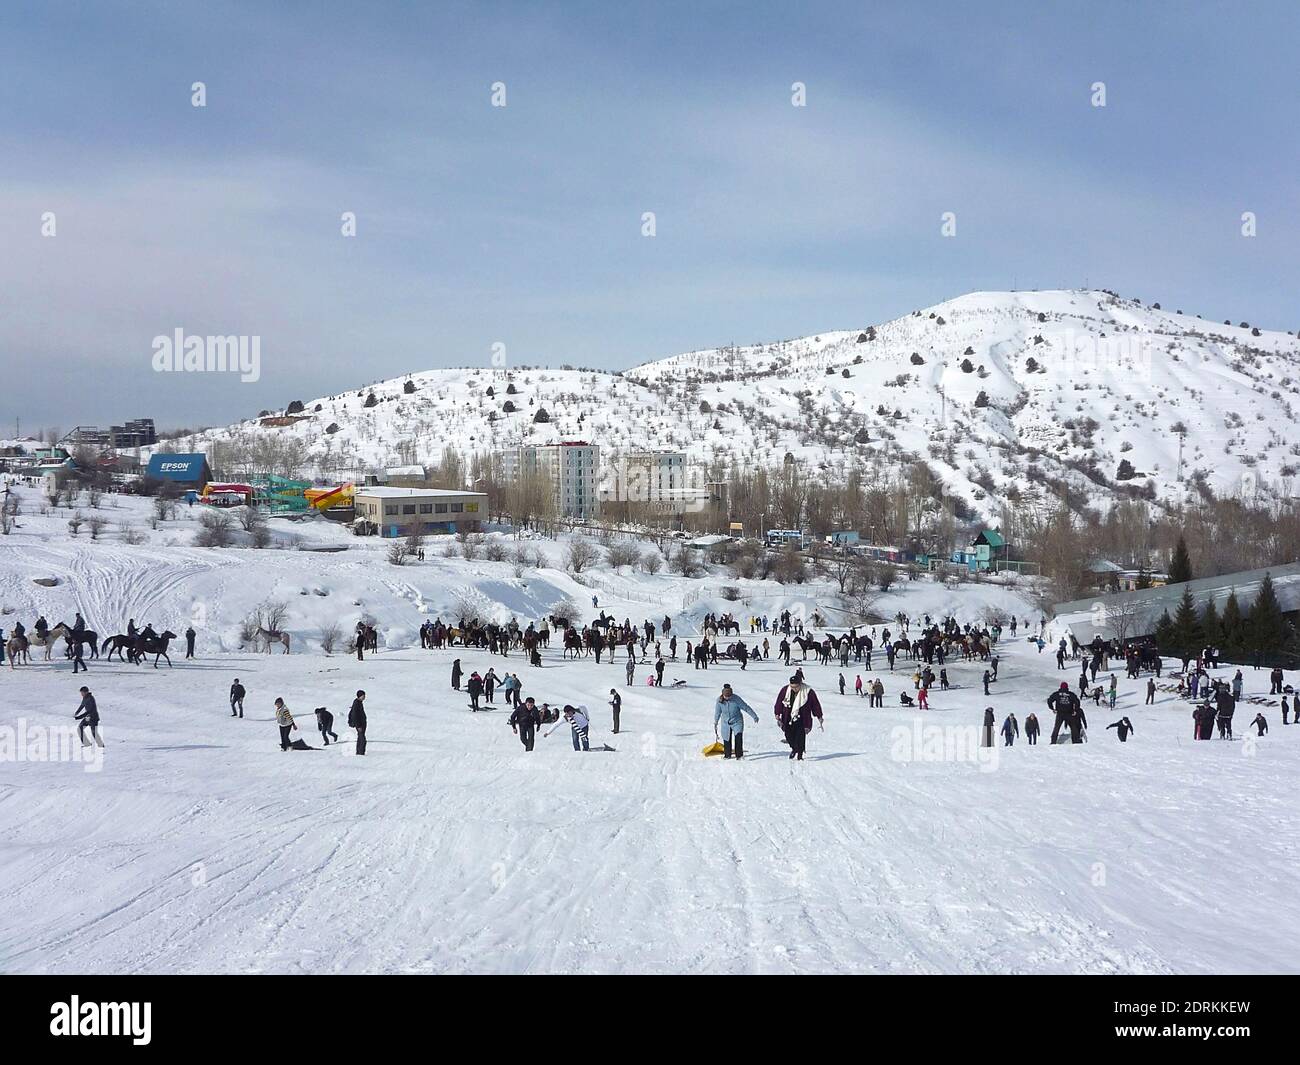 Snowy Chimgan mountains on a sunny day, people climb the mountain and ride  sleds and horses, Uzbekistan Chimgan Mountains, December 2019 Stock Photo -  Alamy